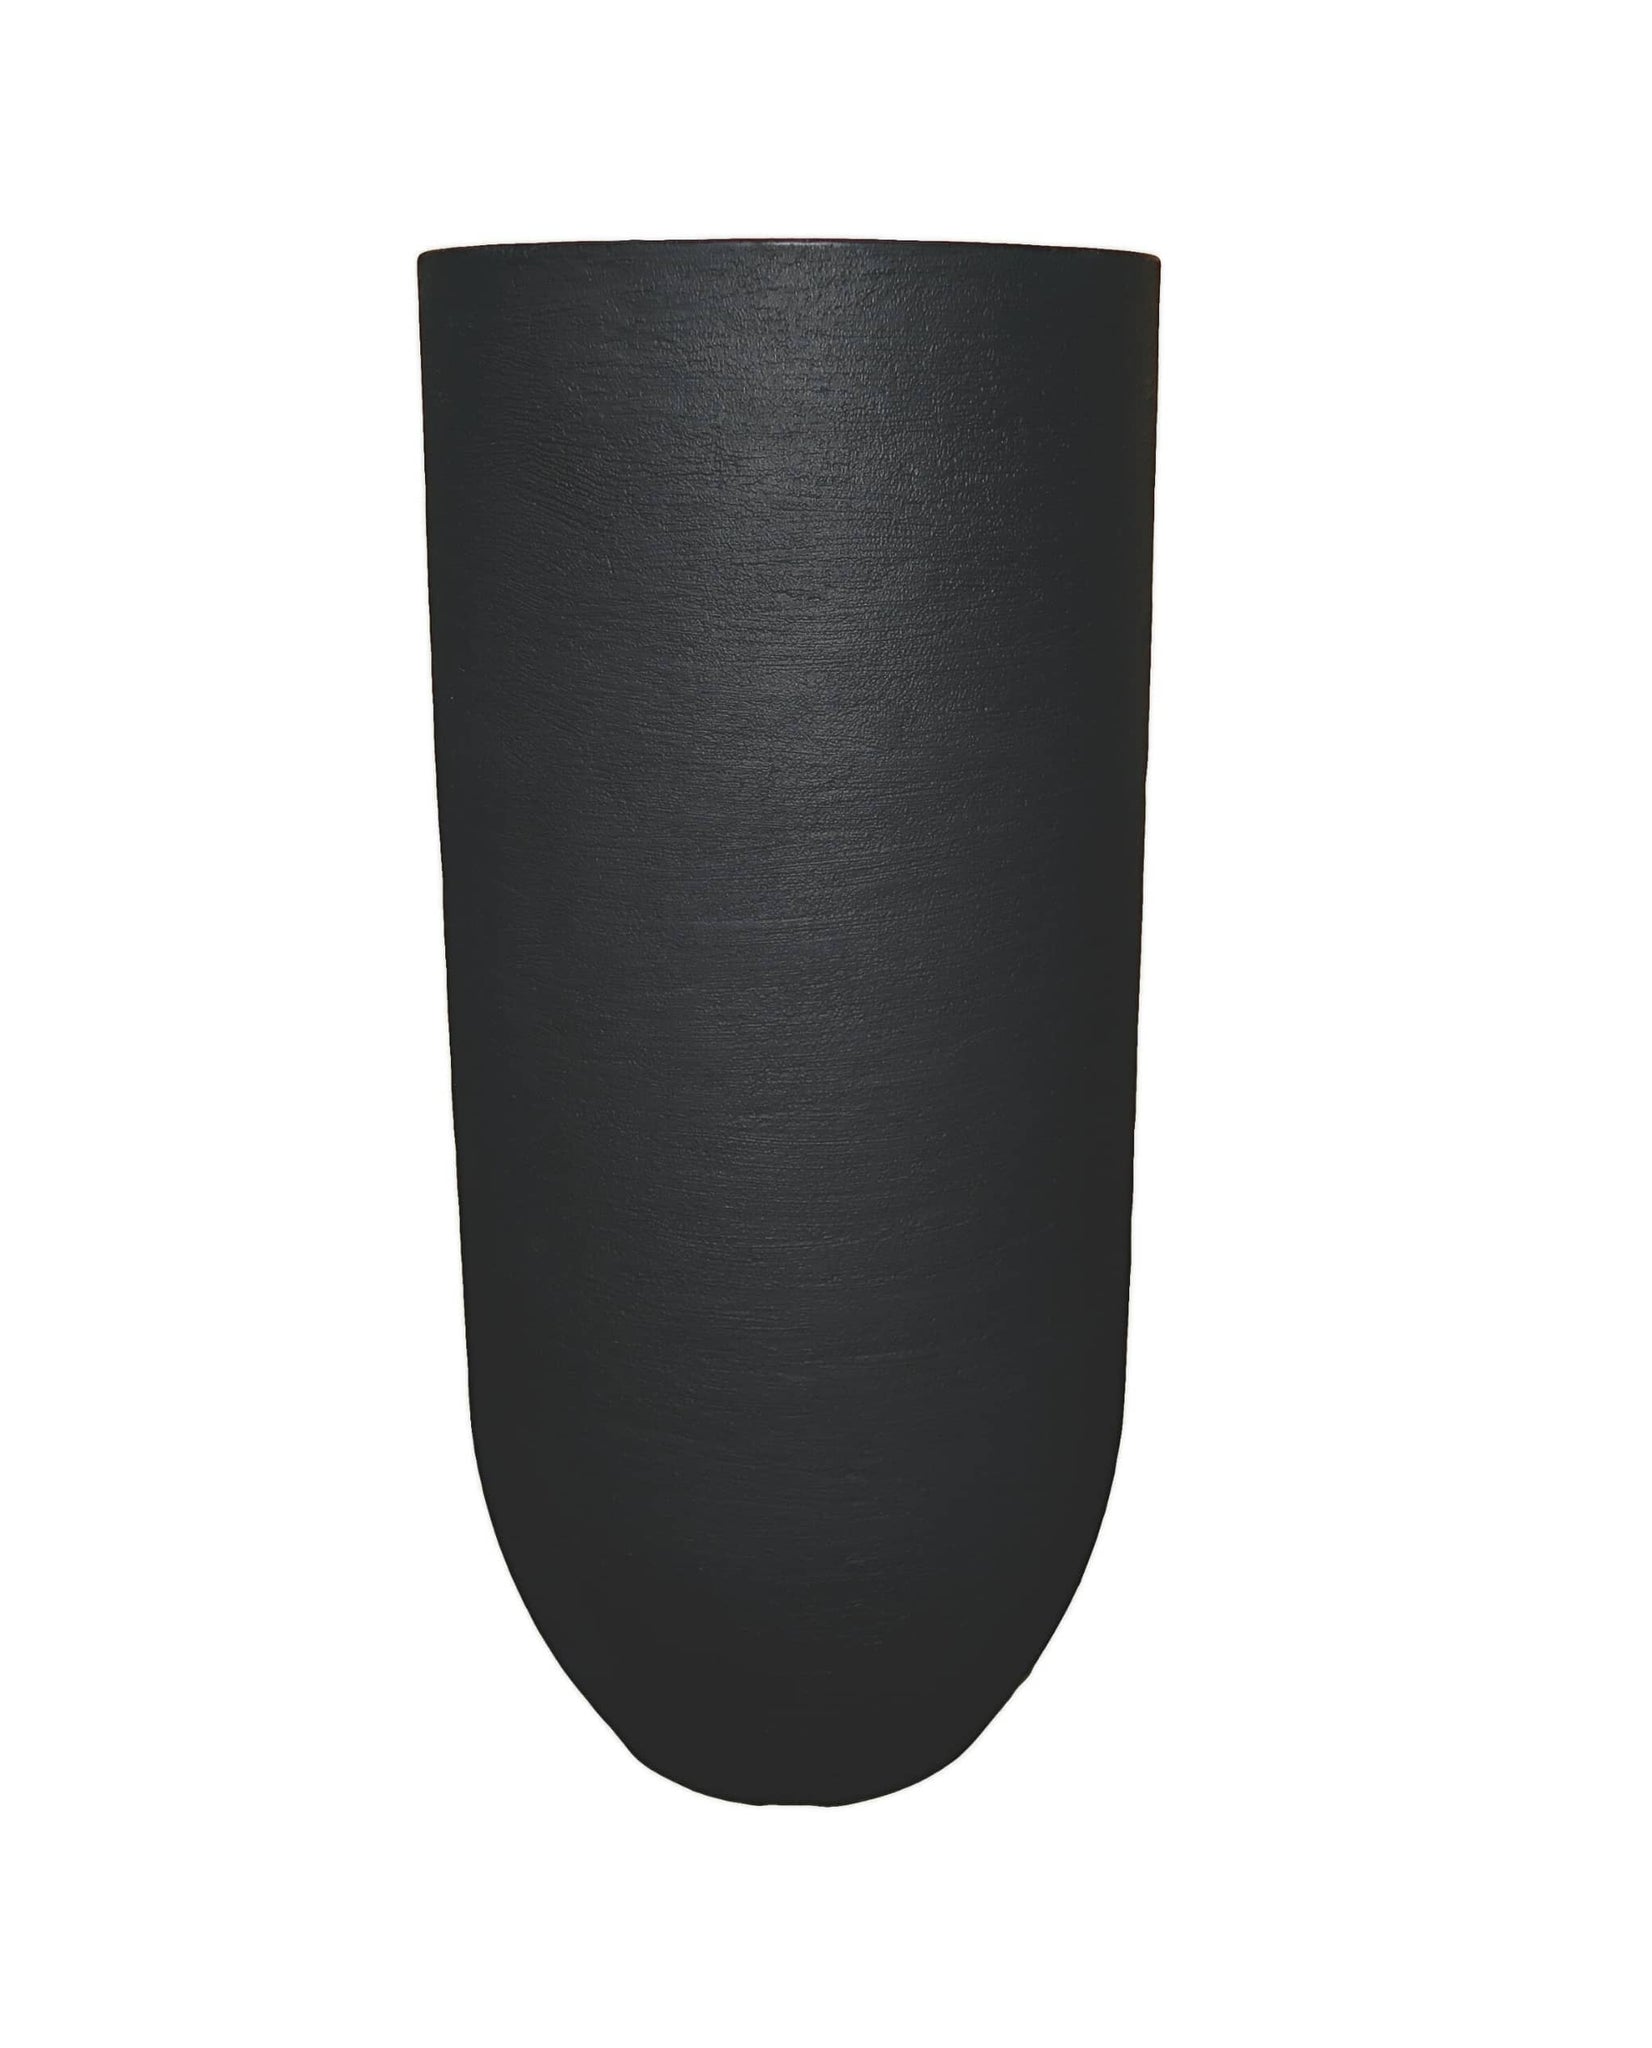 European Verticale Japi Planter, Tall and sleek textured finish. Beautiful complement to any decor. Adds height  and elegance. Florastyle by Hingham. Colour lead (black)